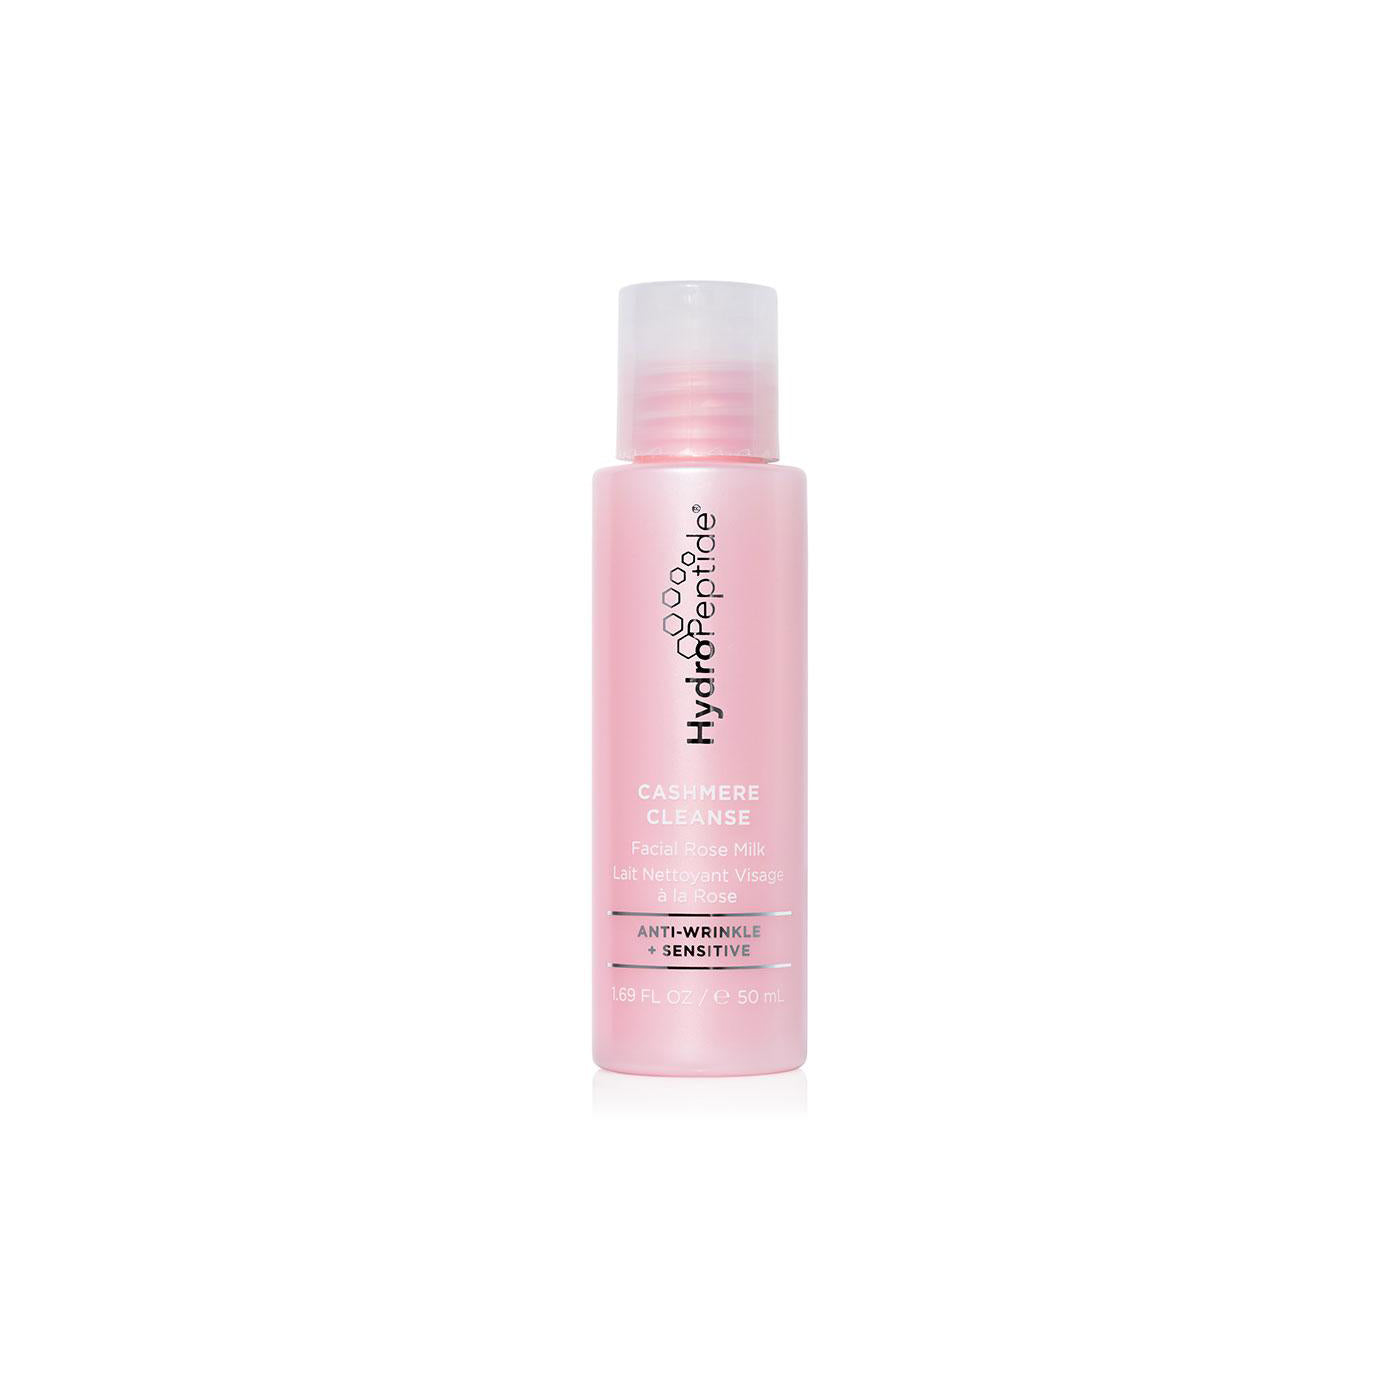 Travel-Size Cashmere Cleanse 50 ml, HydroPeptide